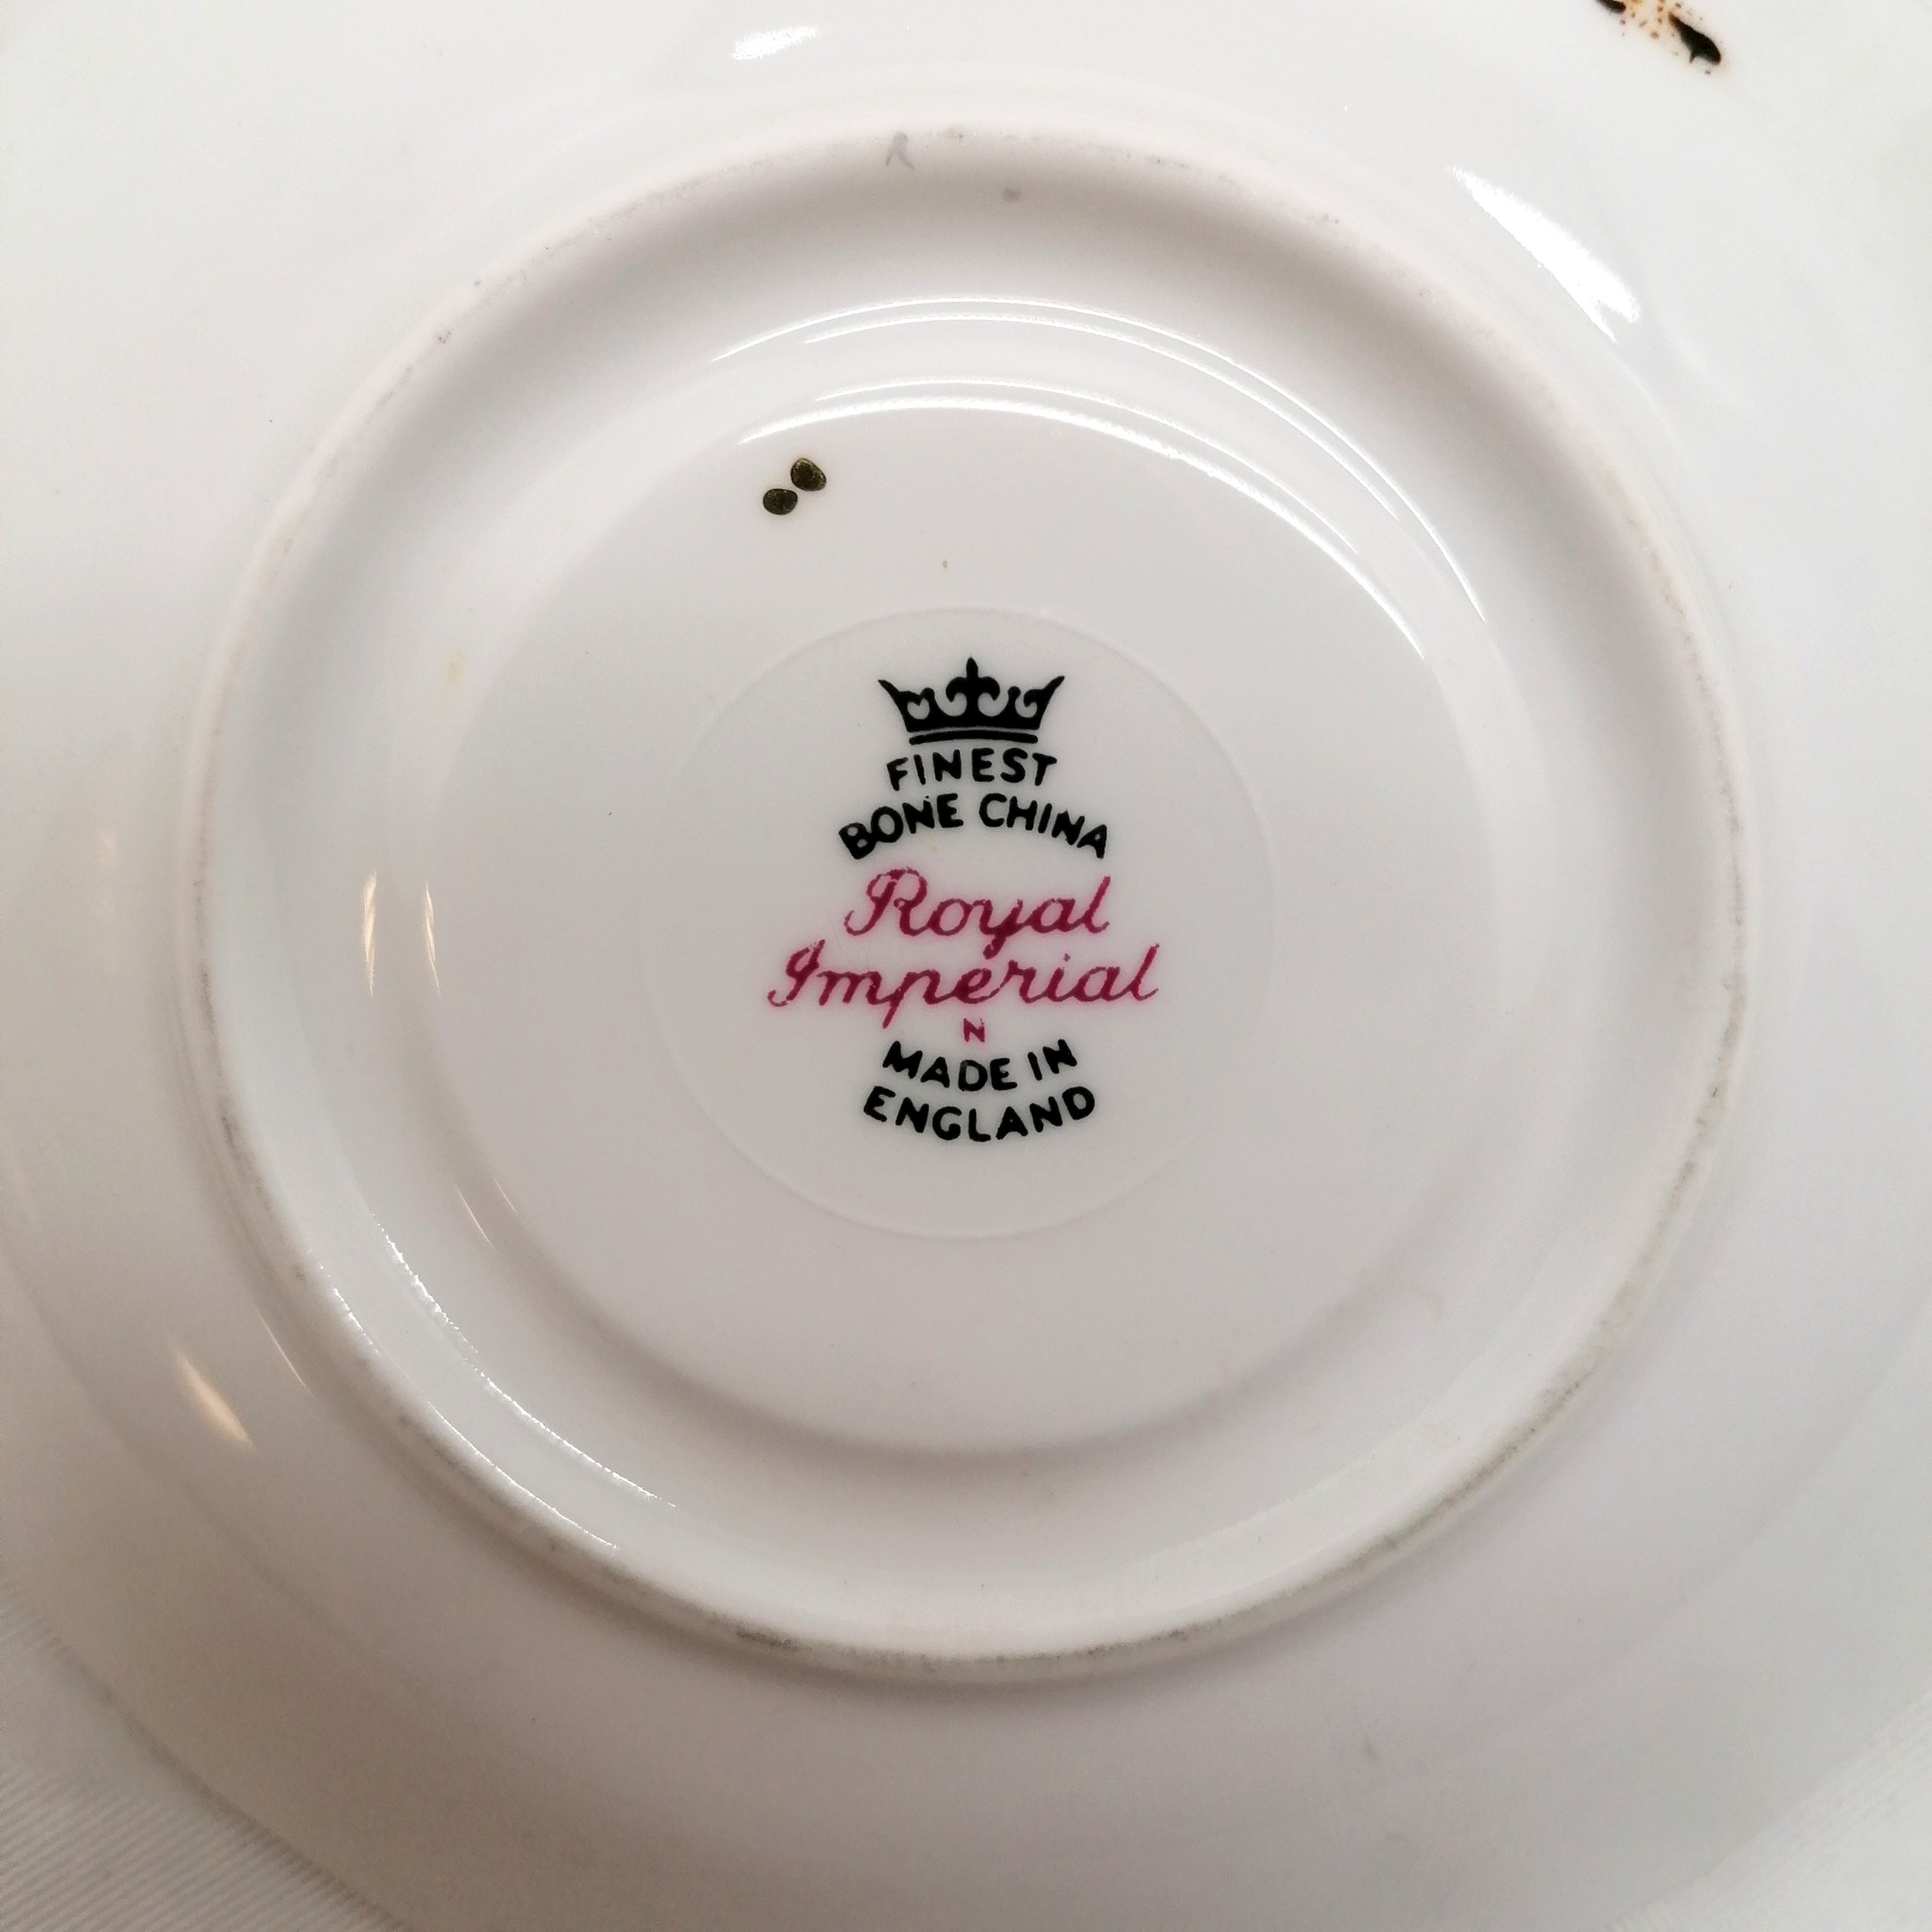 Royal Albert Tea service in the Lady Hamilton pattern, 1 cup missing, in good used condition, t/w - Image 4 of 4